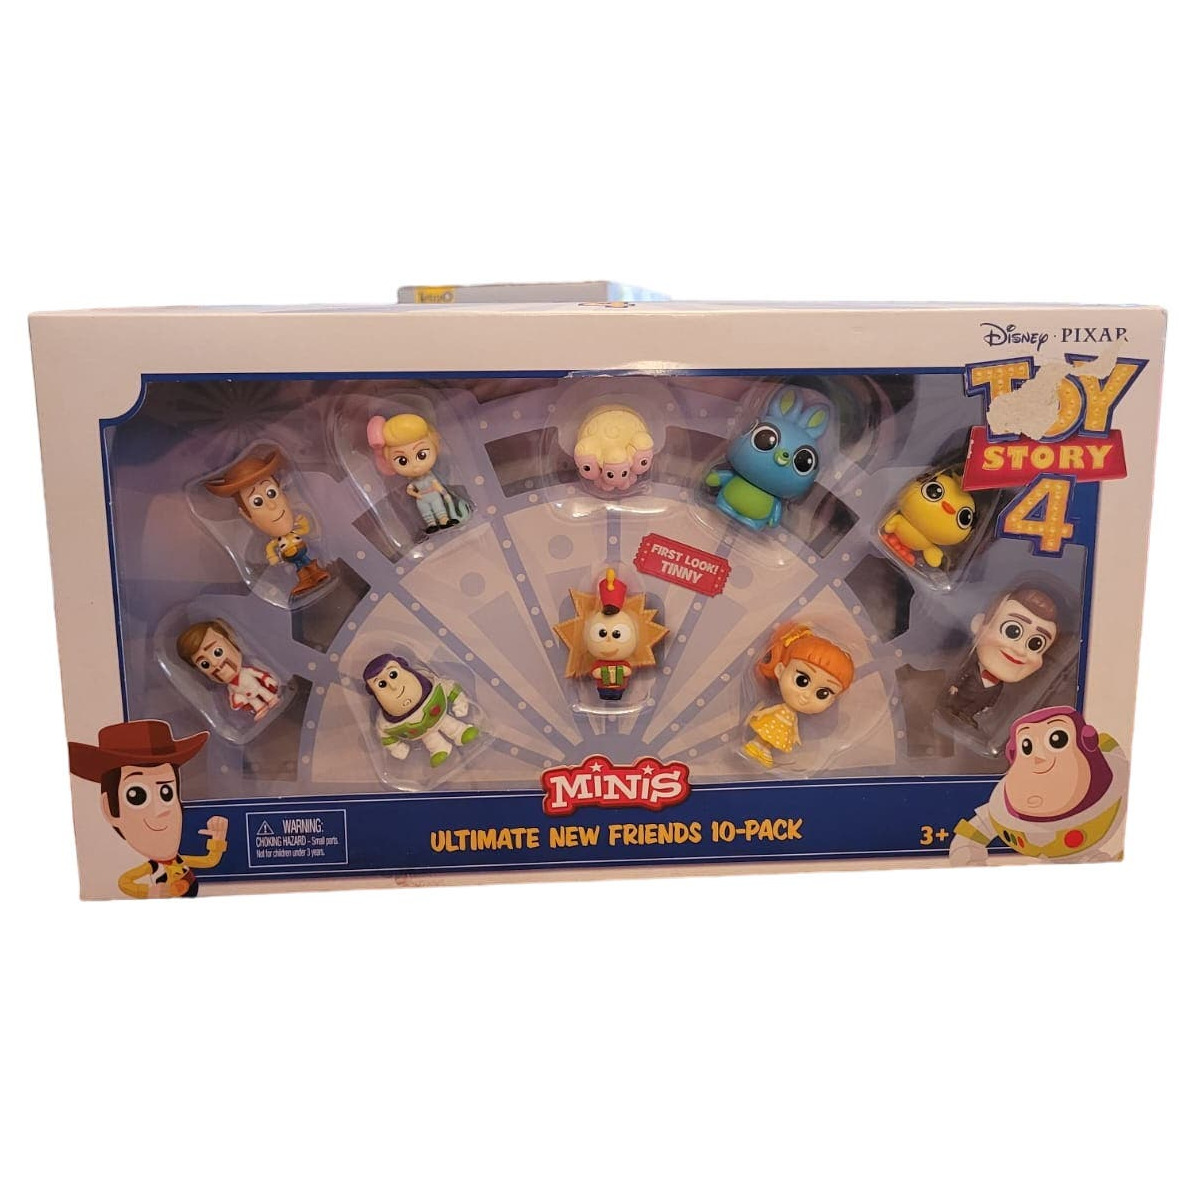 Toy Story 4 Minis Ultimate New Friends 10 Pack